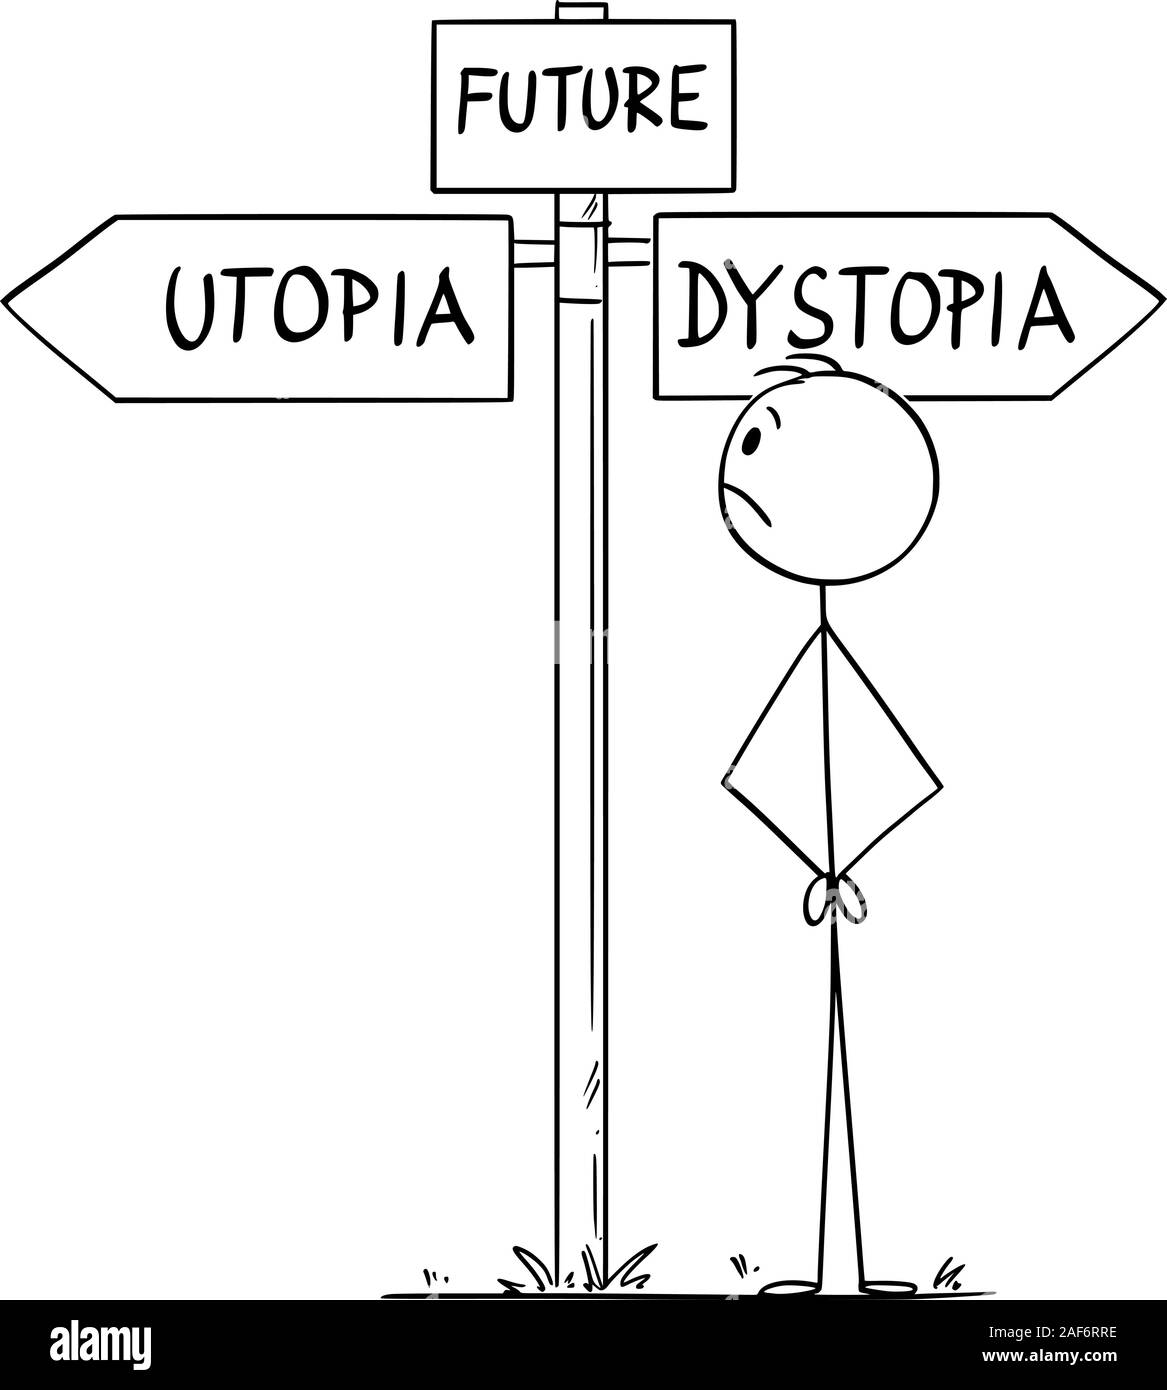 Vector cartoon stick figure drawing conceptual illustration of man standing on crossroad representing human civilization or mankind choosing the future between utopia and dystopia. Stock Vector